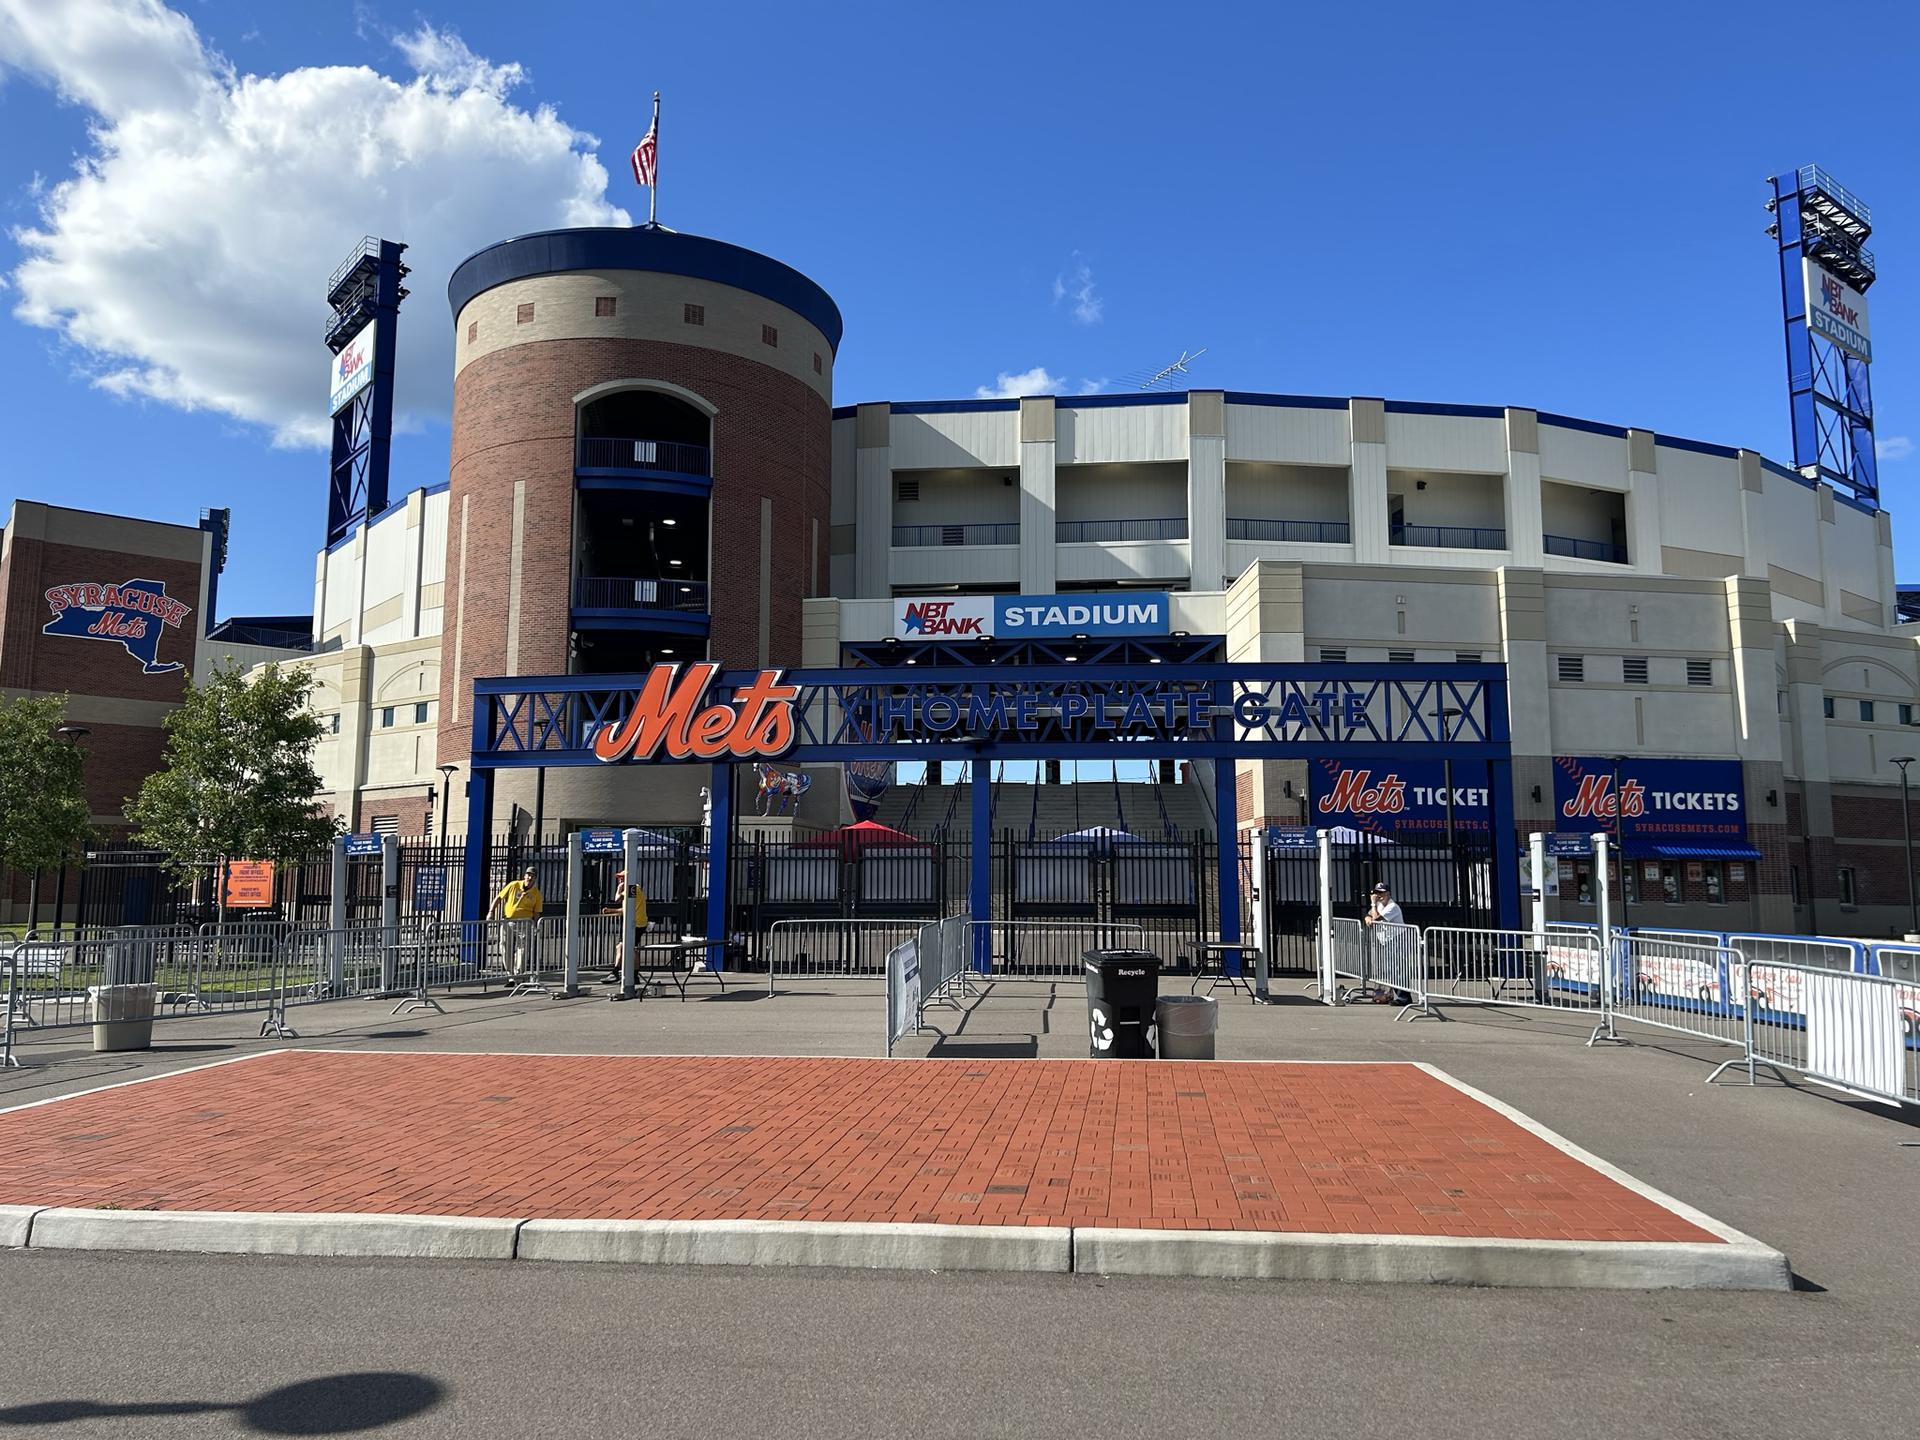 The outside of Syracuse's ballpark